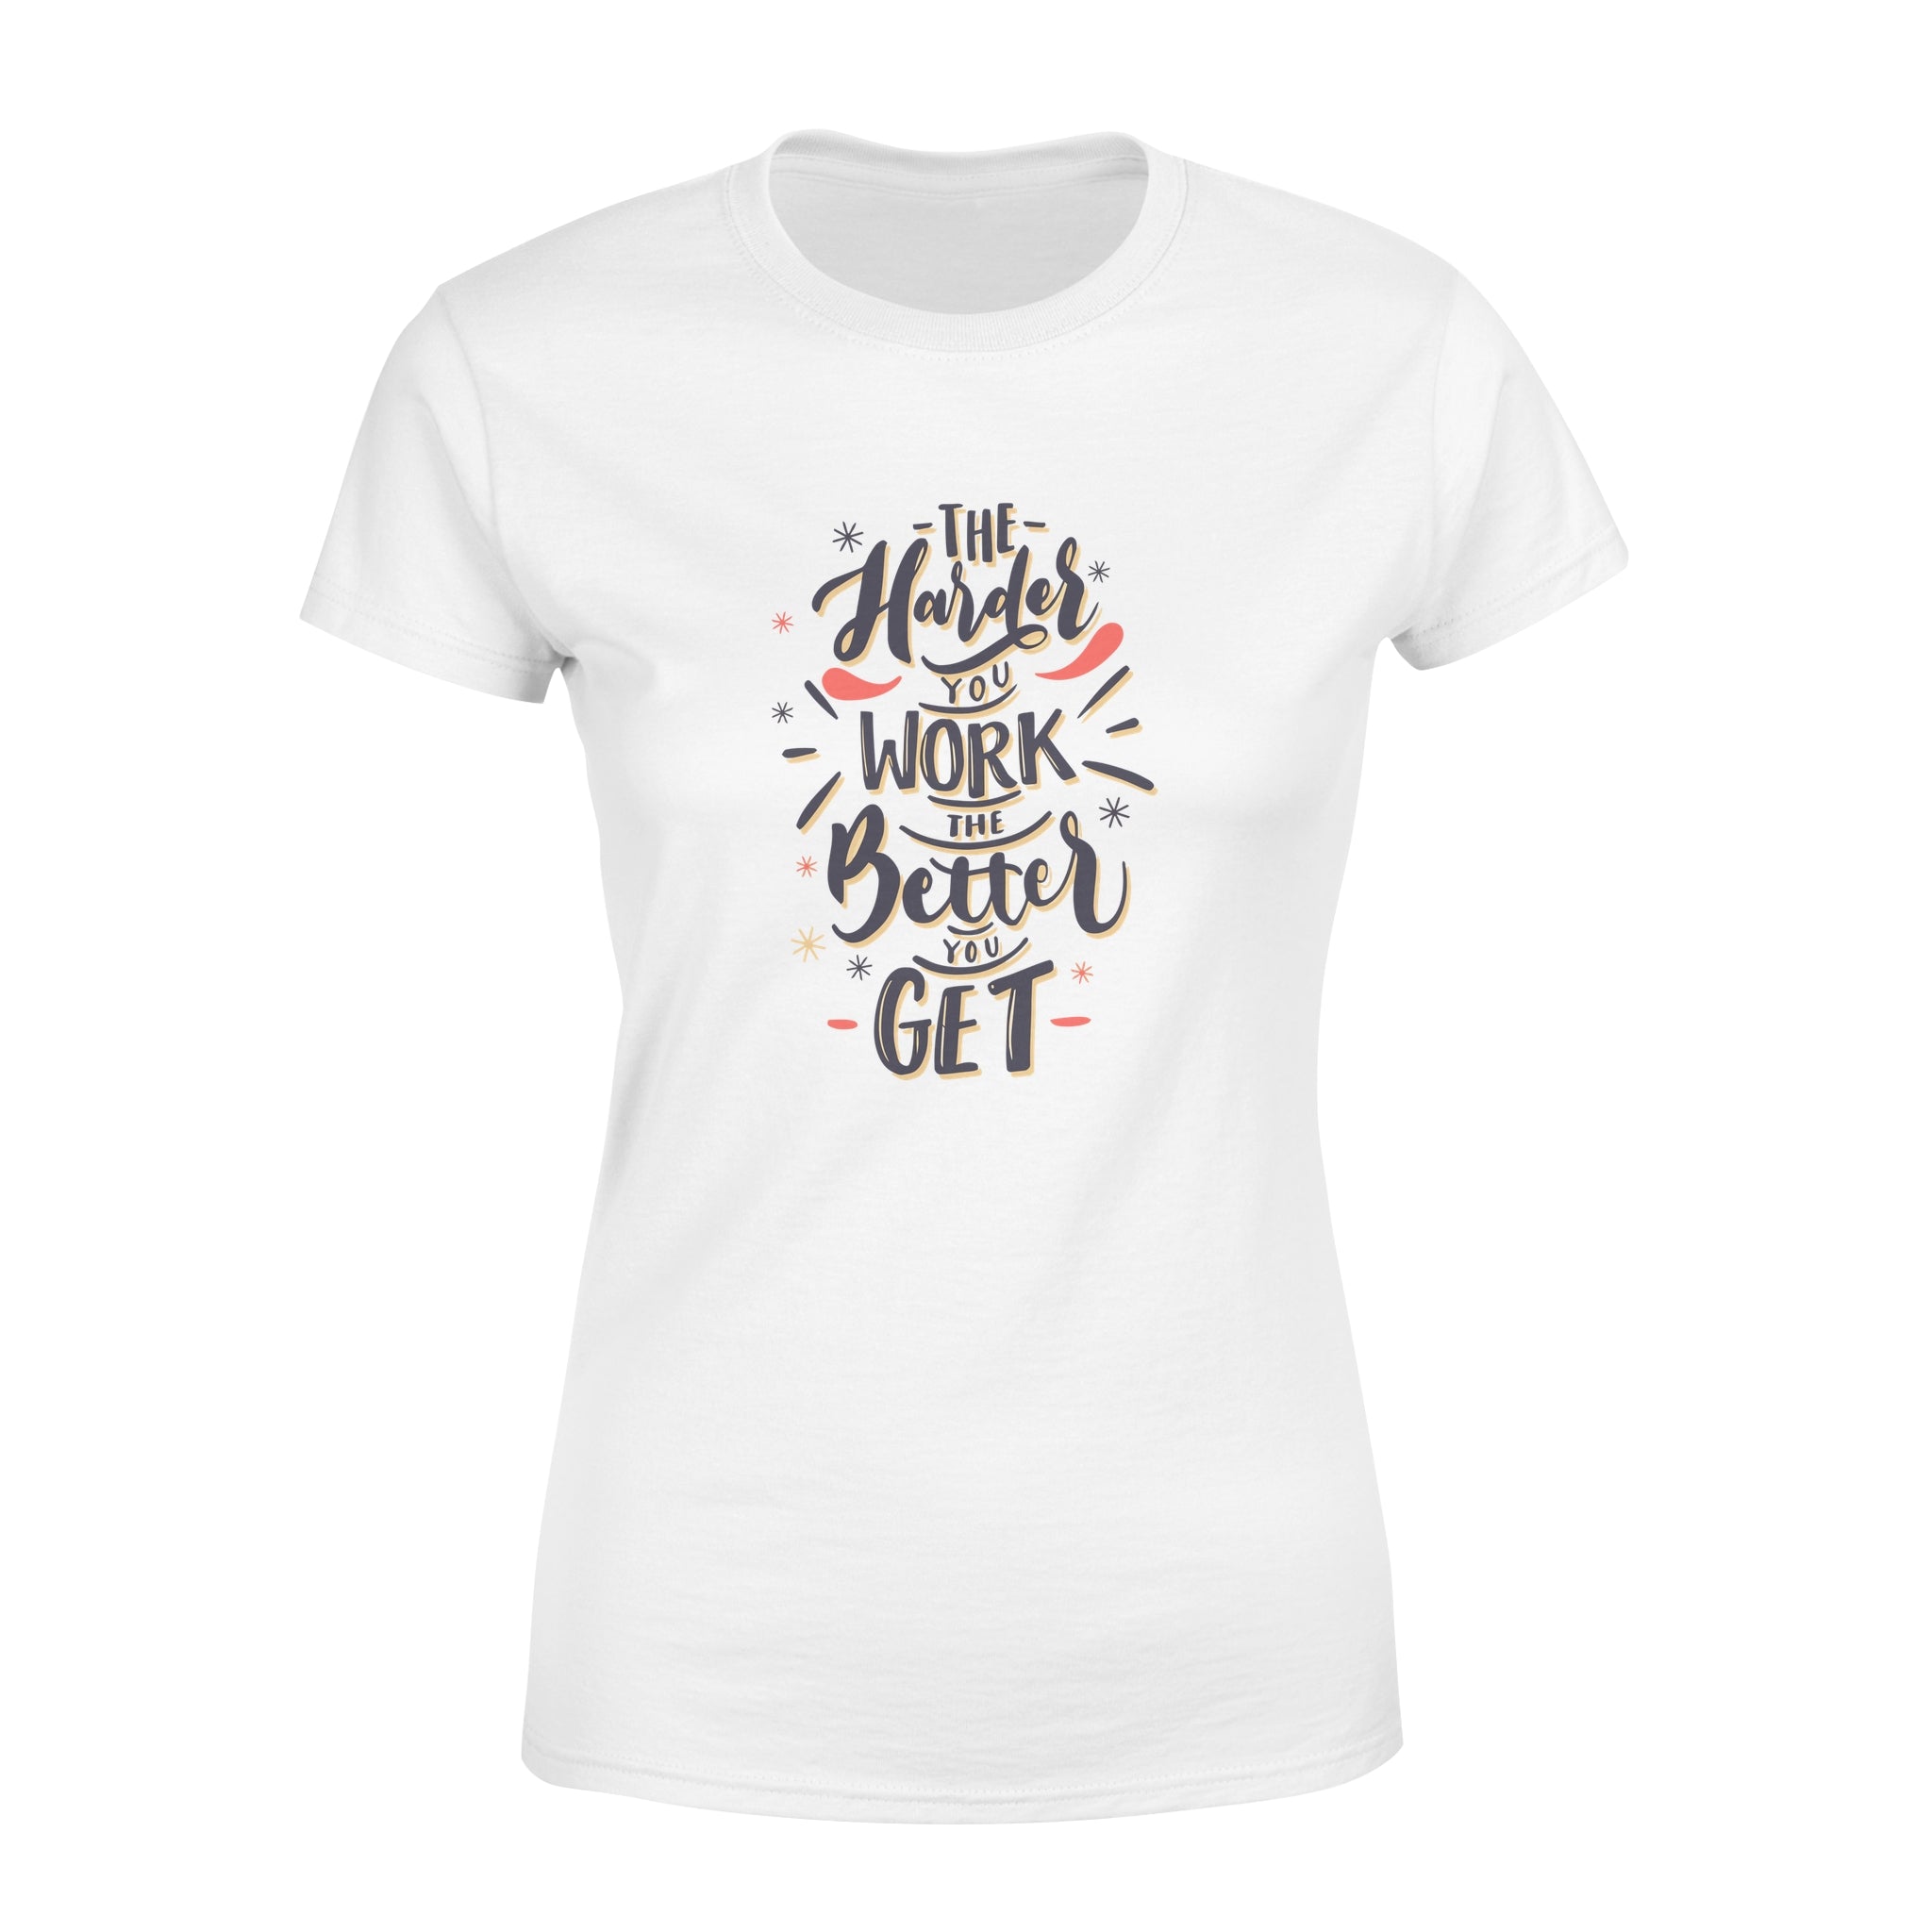 The Harder You Work The Better You Get - Women's T-shirt